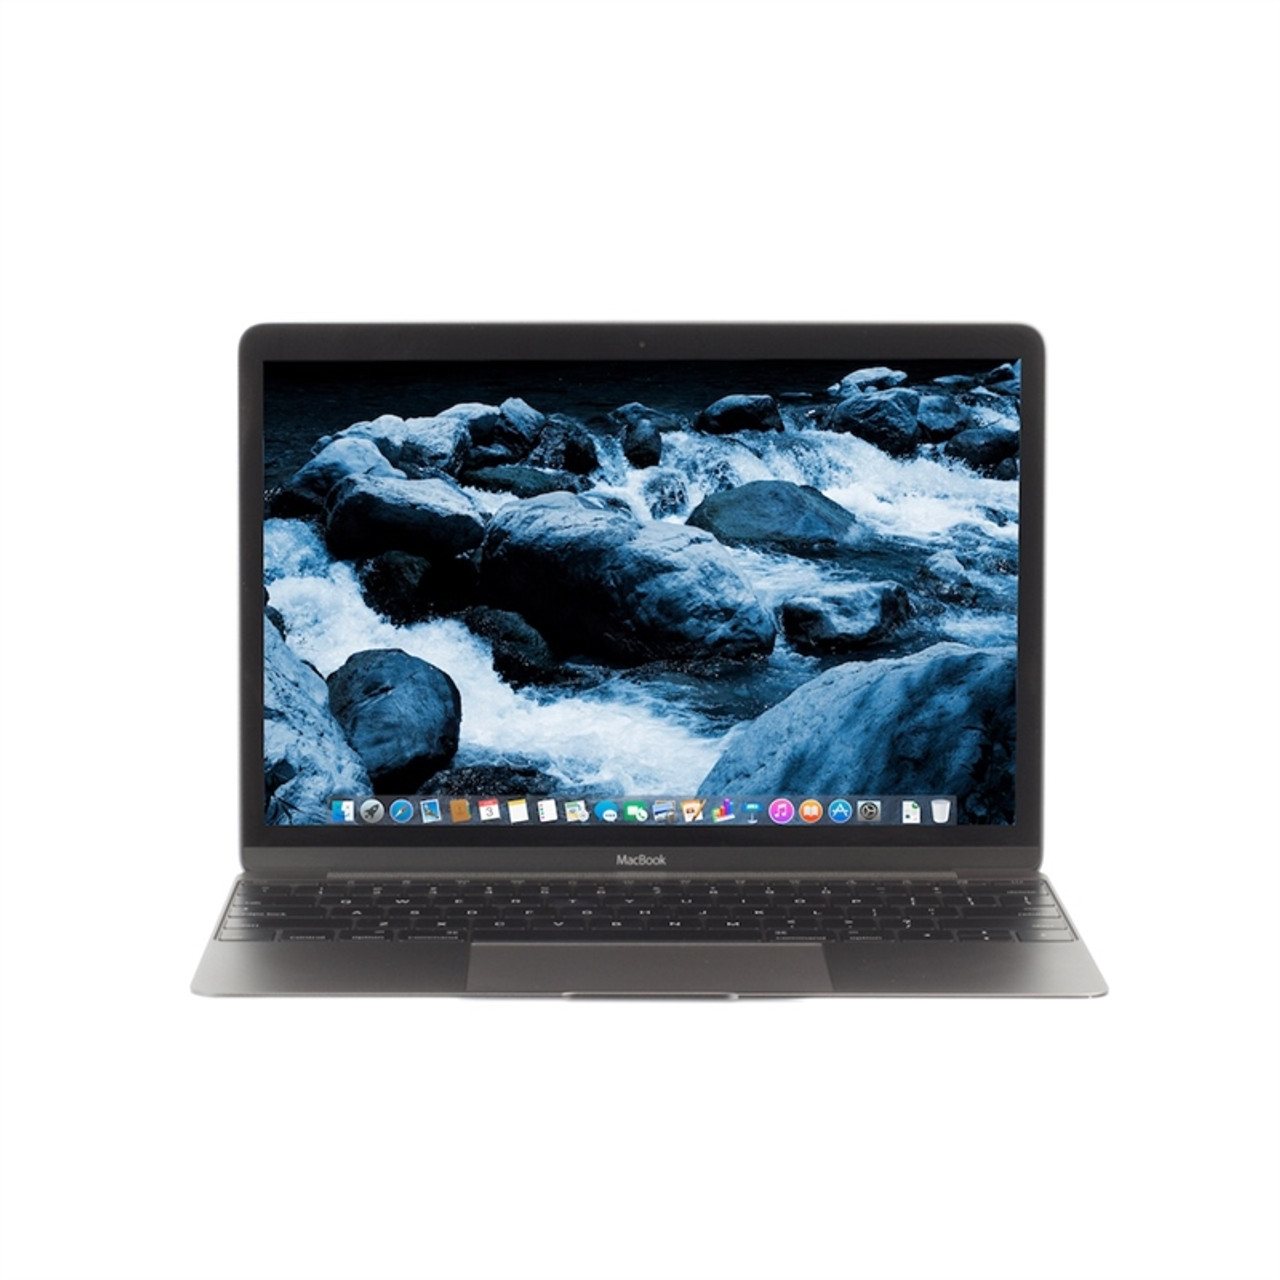 Fair Condition*: Apple MacBook 12-inch 1.1GHz Core M (Early 2015, Space  Gray) MJY32LL/A